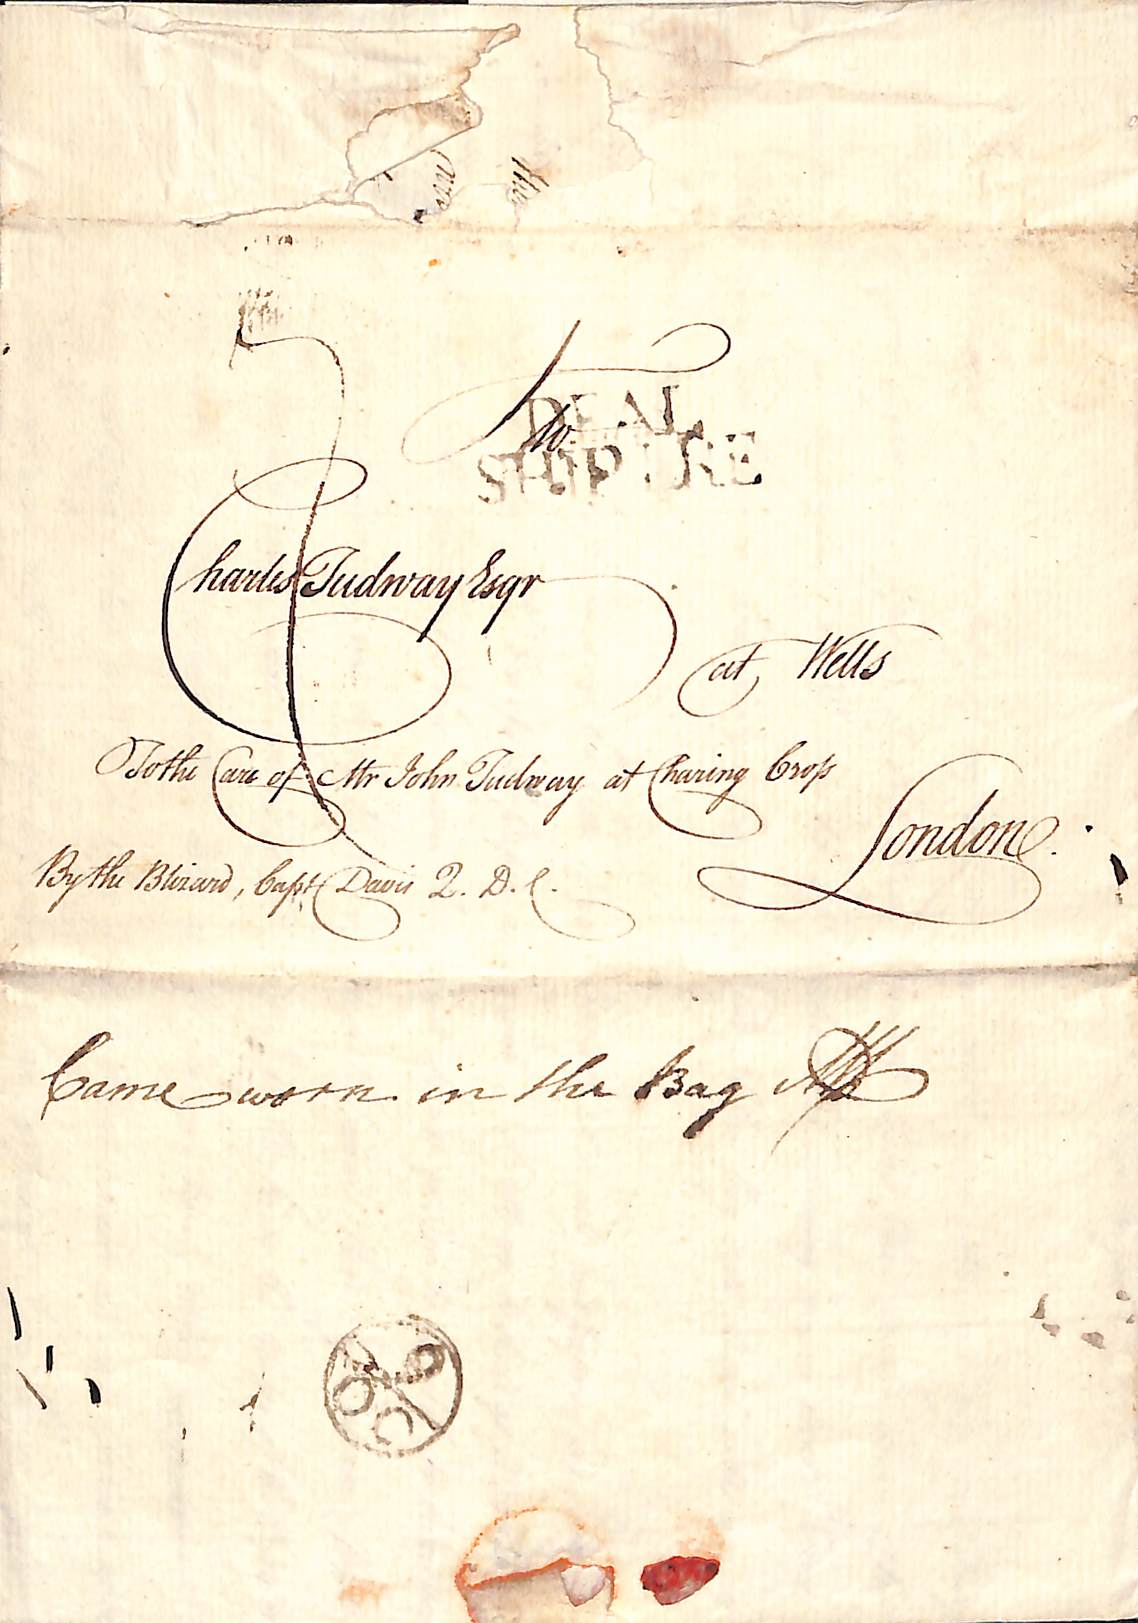 Deal. 1767 (Aug 18) and 1770 (Mar 27) Entire letters from Antigua to Charles Tudway at Wells, care